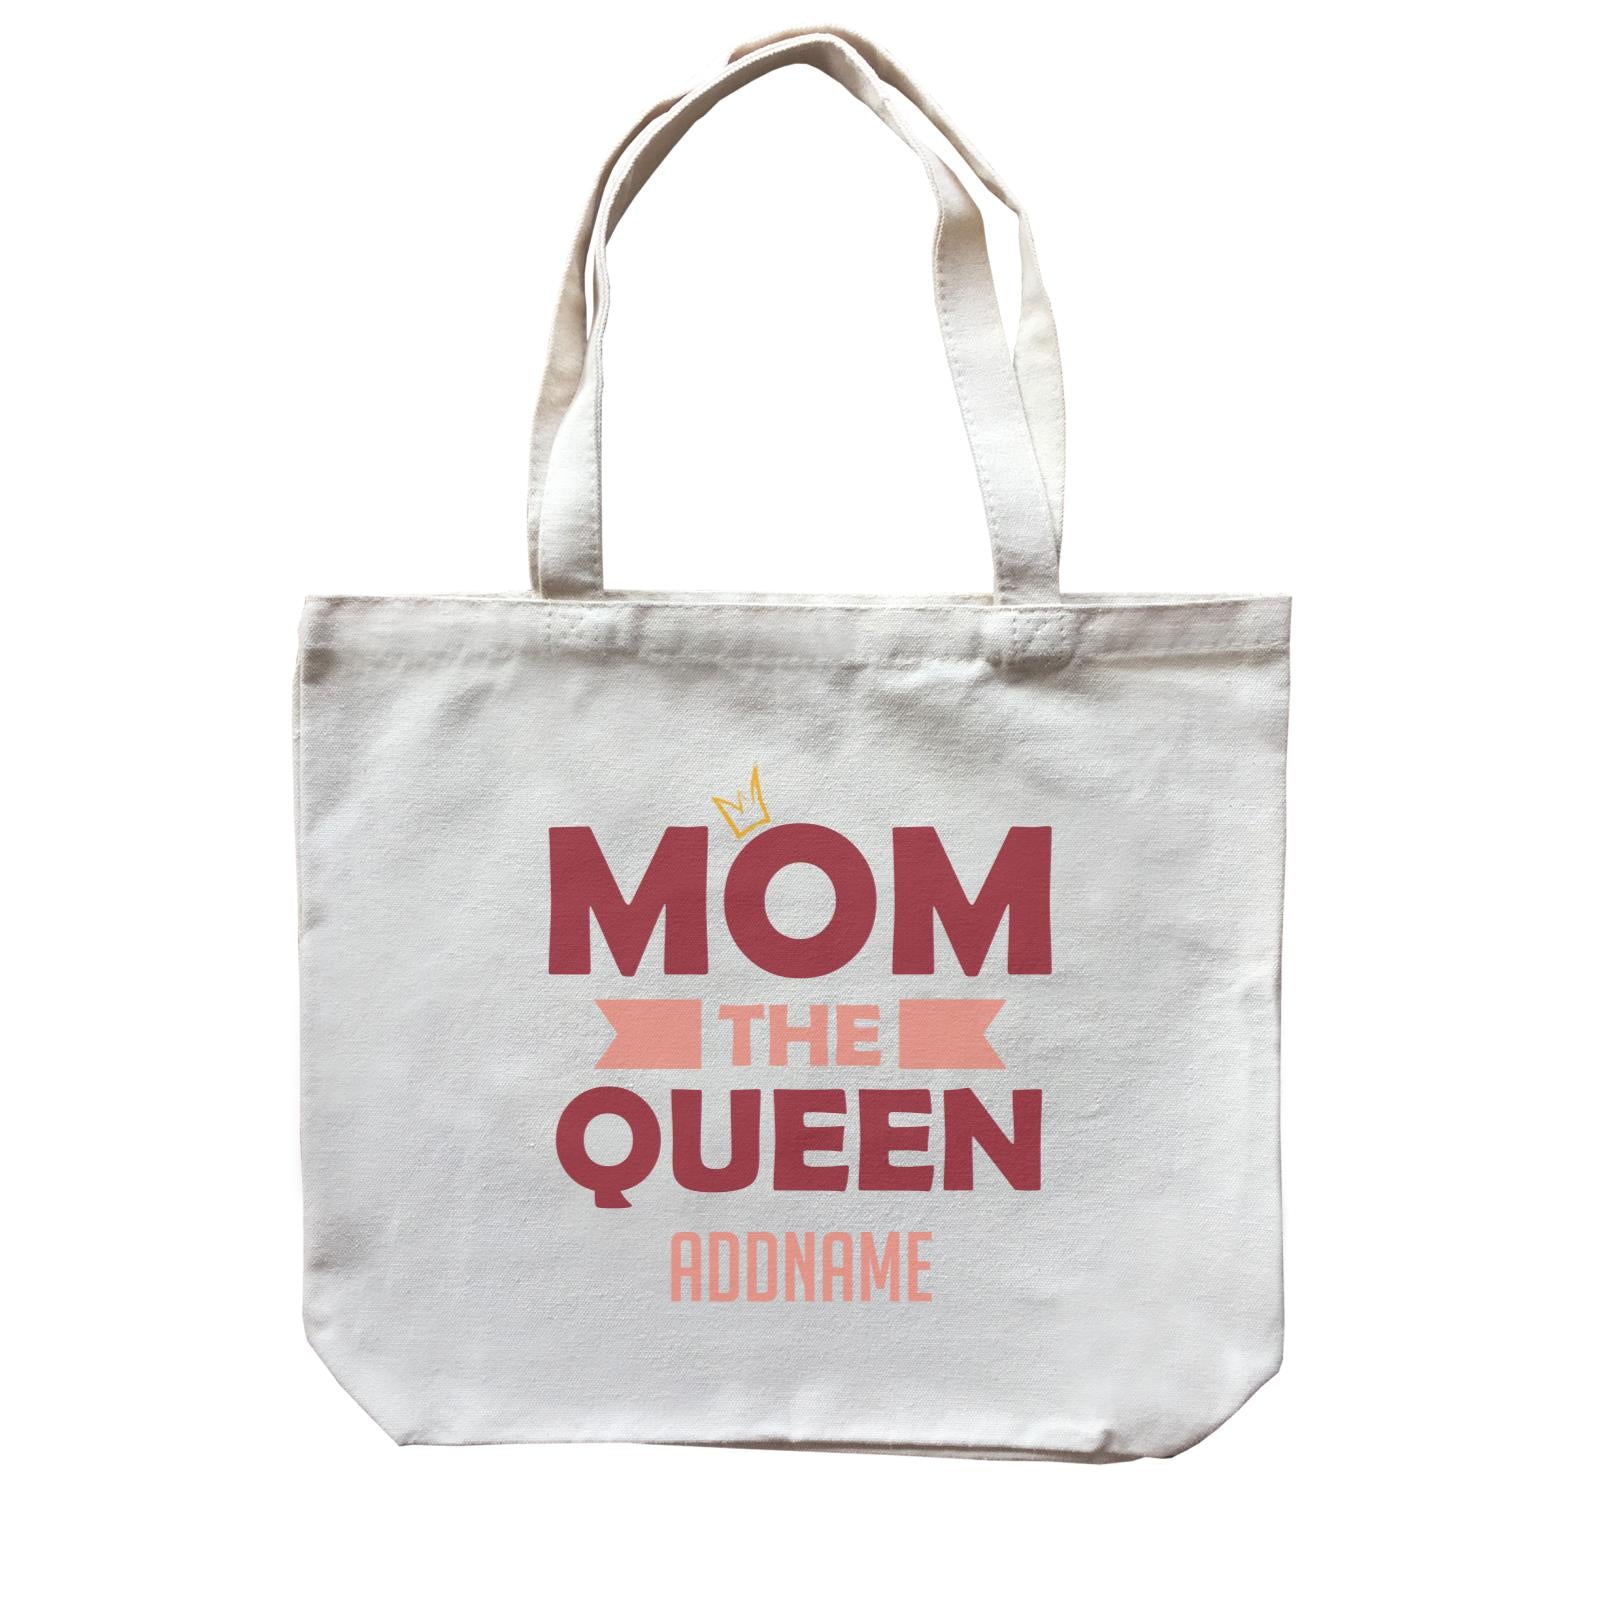 Awesome Mom 2 Mom The Queen Addname Canvas Bag